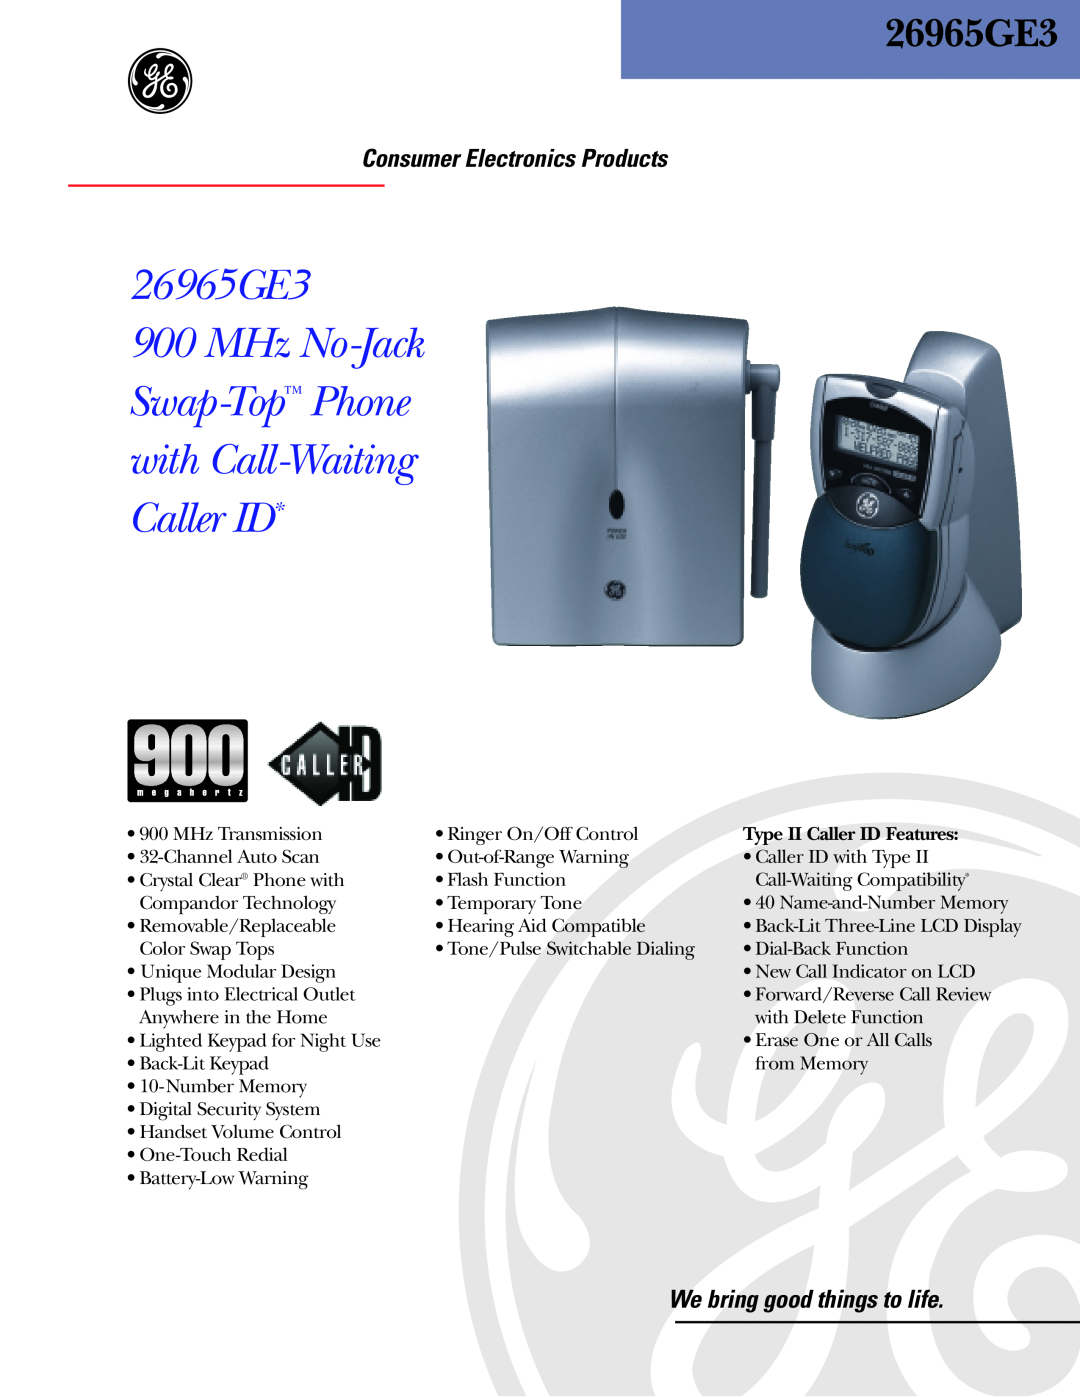 GE S-26965GE3 manual MHz No-Jack Swap-Top Phone with Call-Waiting Caller ID, Consumer Electronics Products 